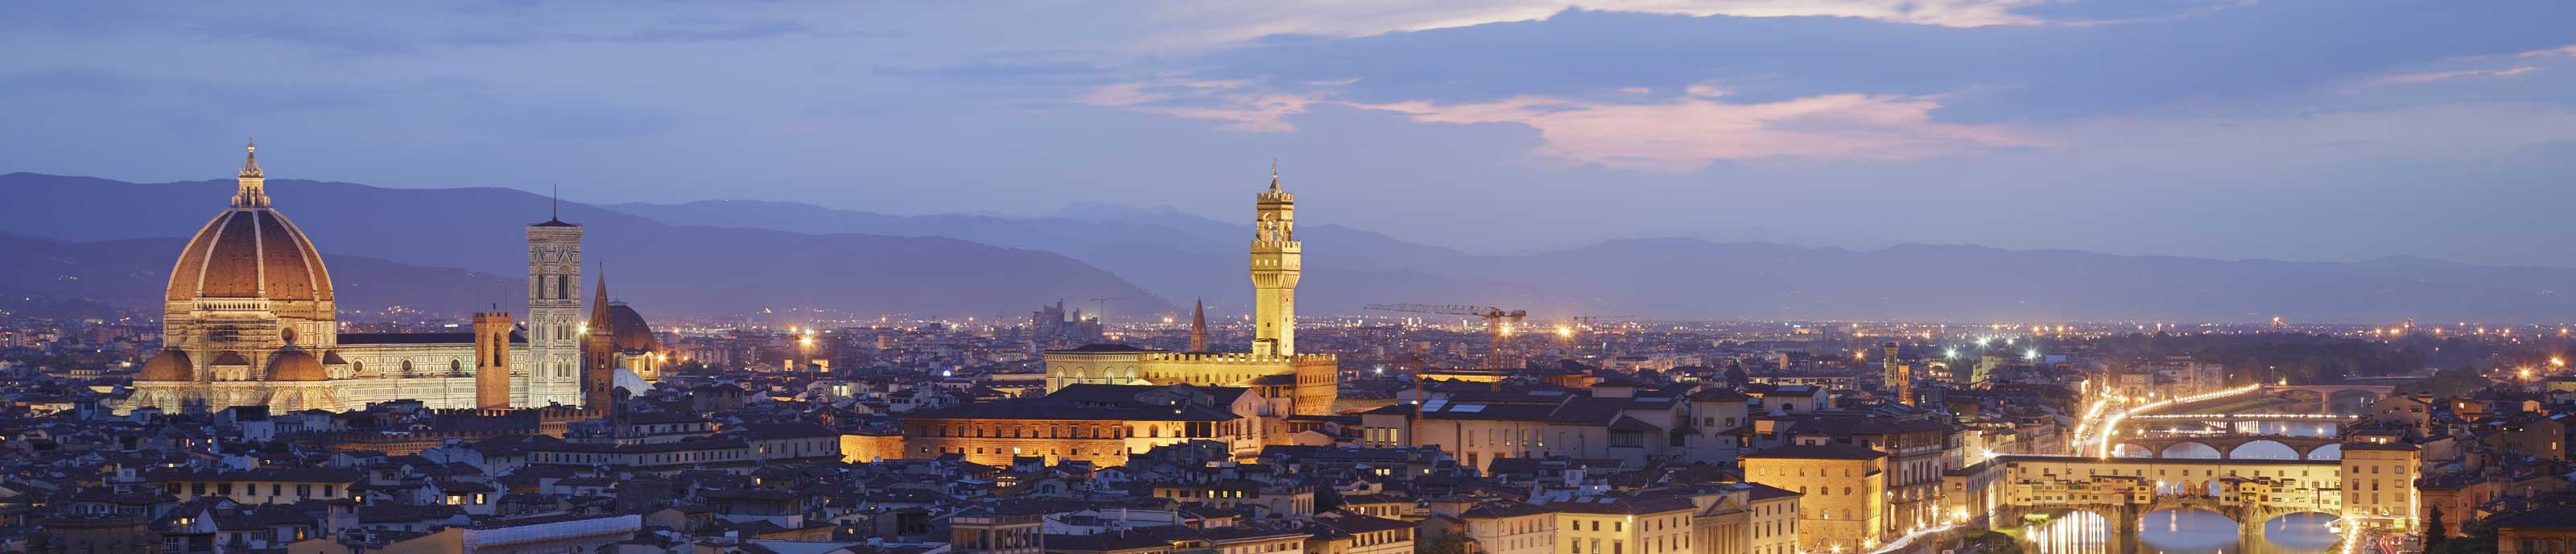 A view of Florence, Italy